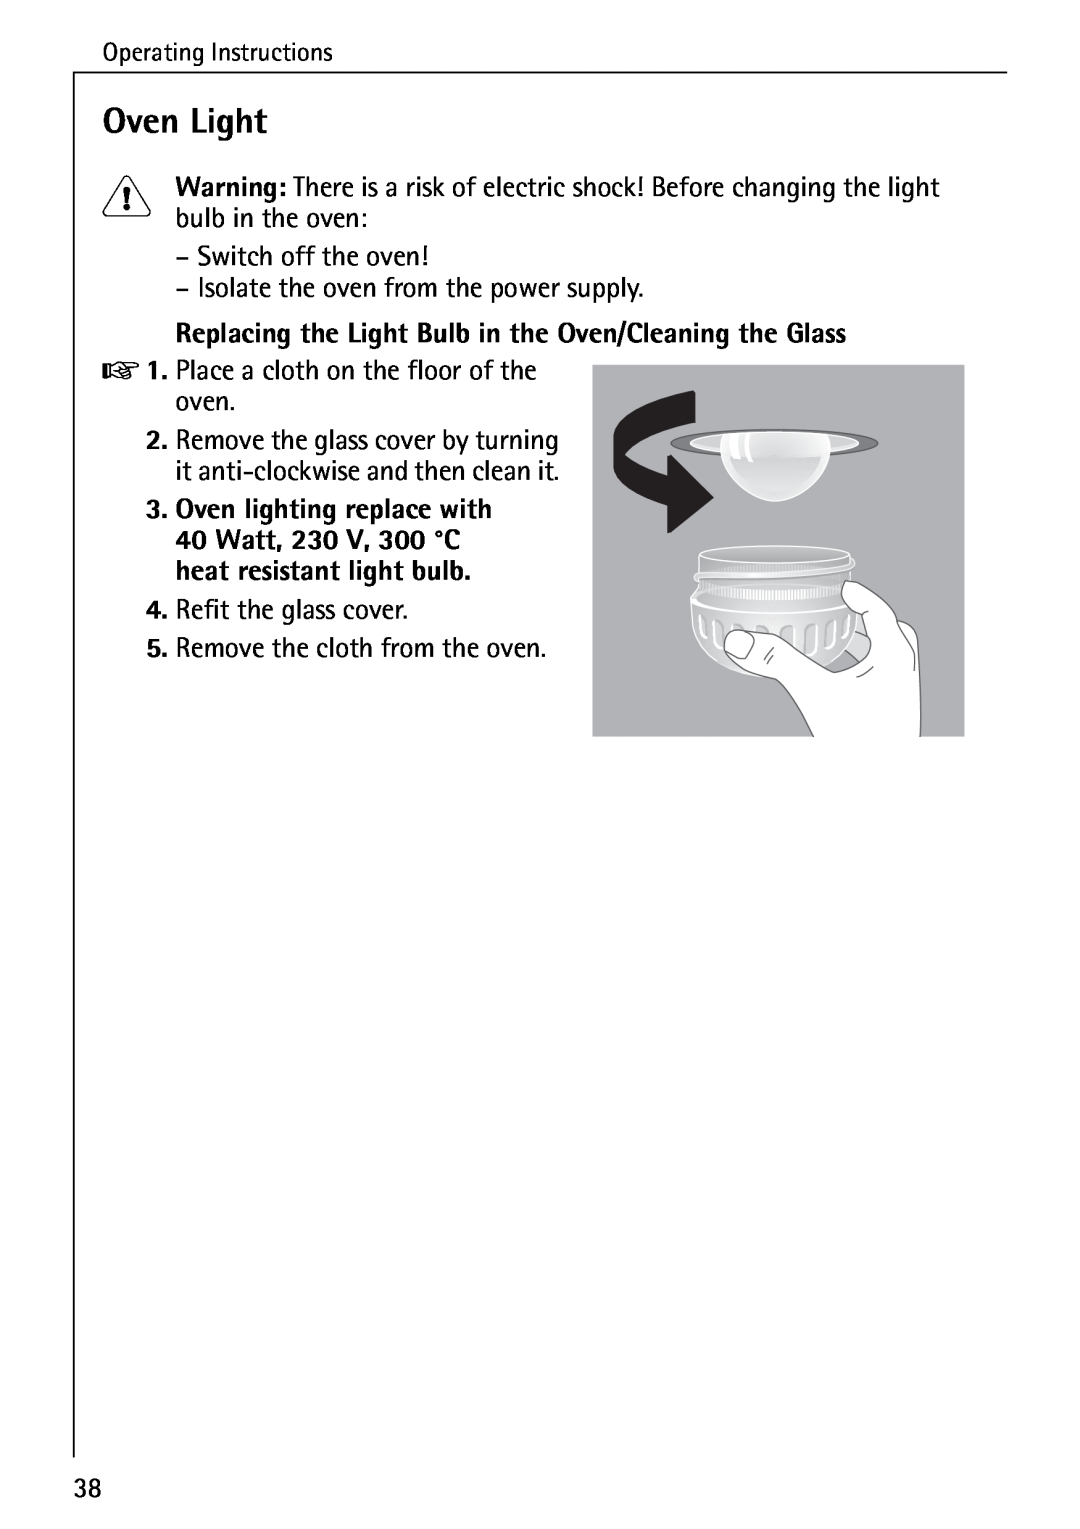 AEG 5033 V Oven Light, bulb in the oven, Replacing the Light Bulb in the Oven/Cleaning the Glass, Operating Instructions 